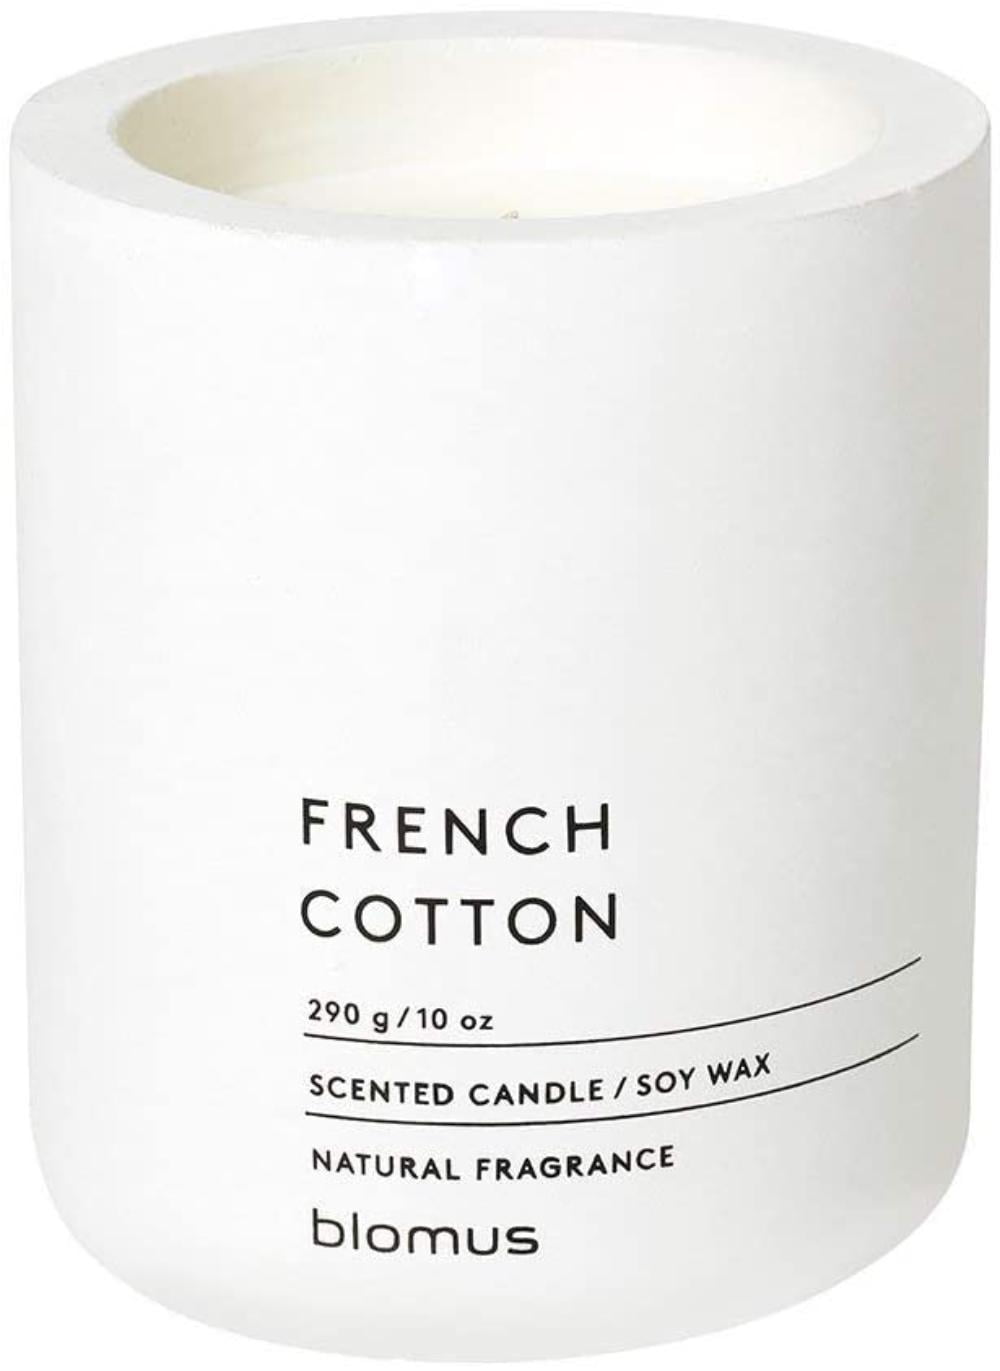 Pomegranate and Sweet Apple Katie Loxton Happy Birthday Gold Tone 5.6 Ounce Soy Wax Jar Candle